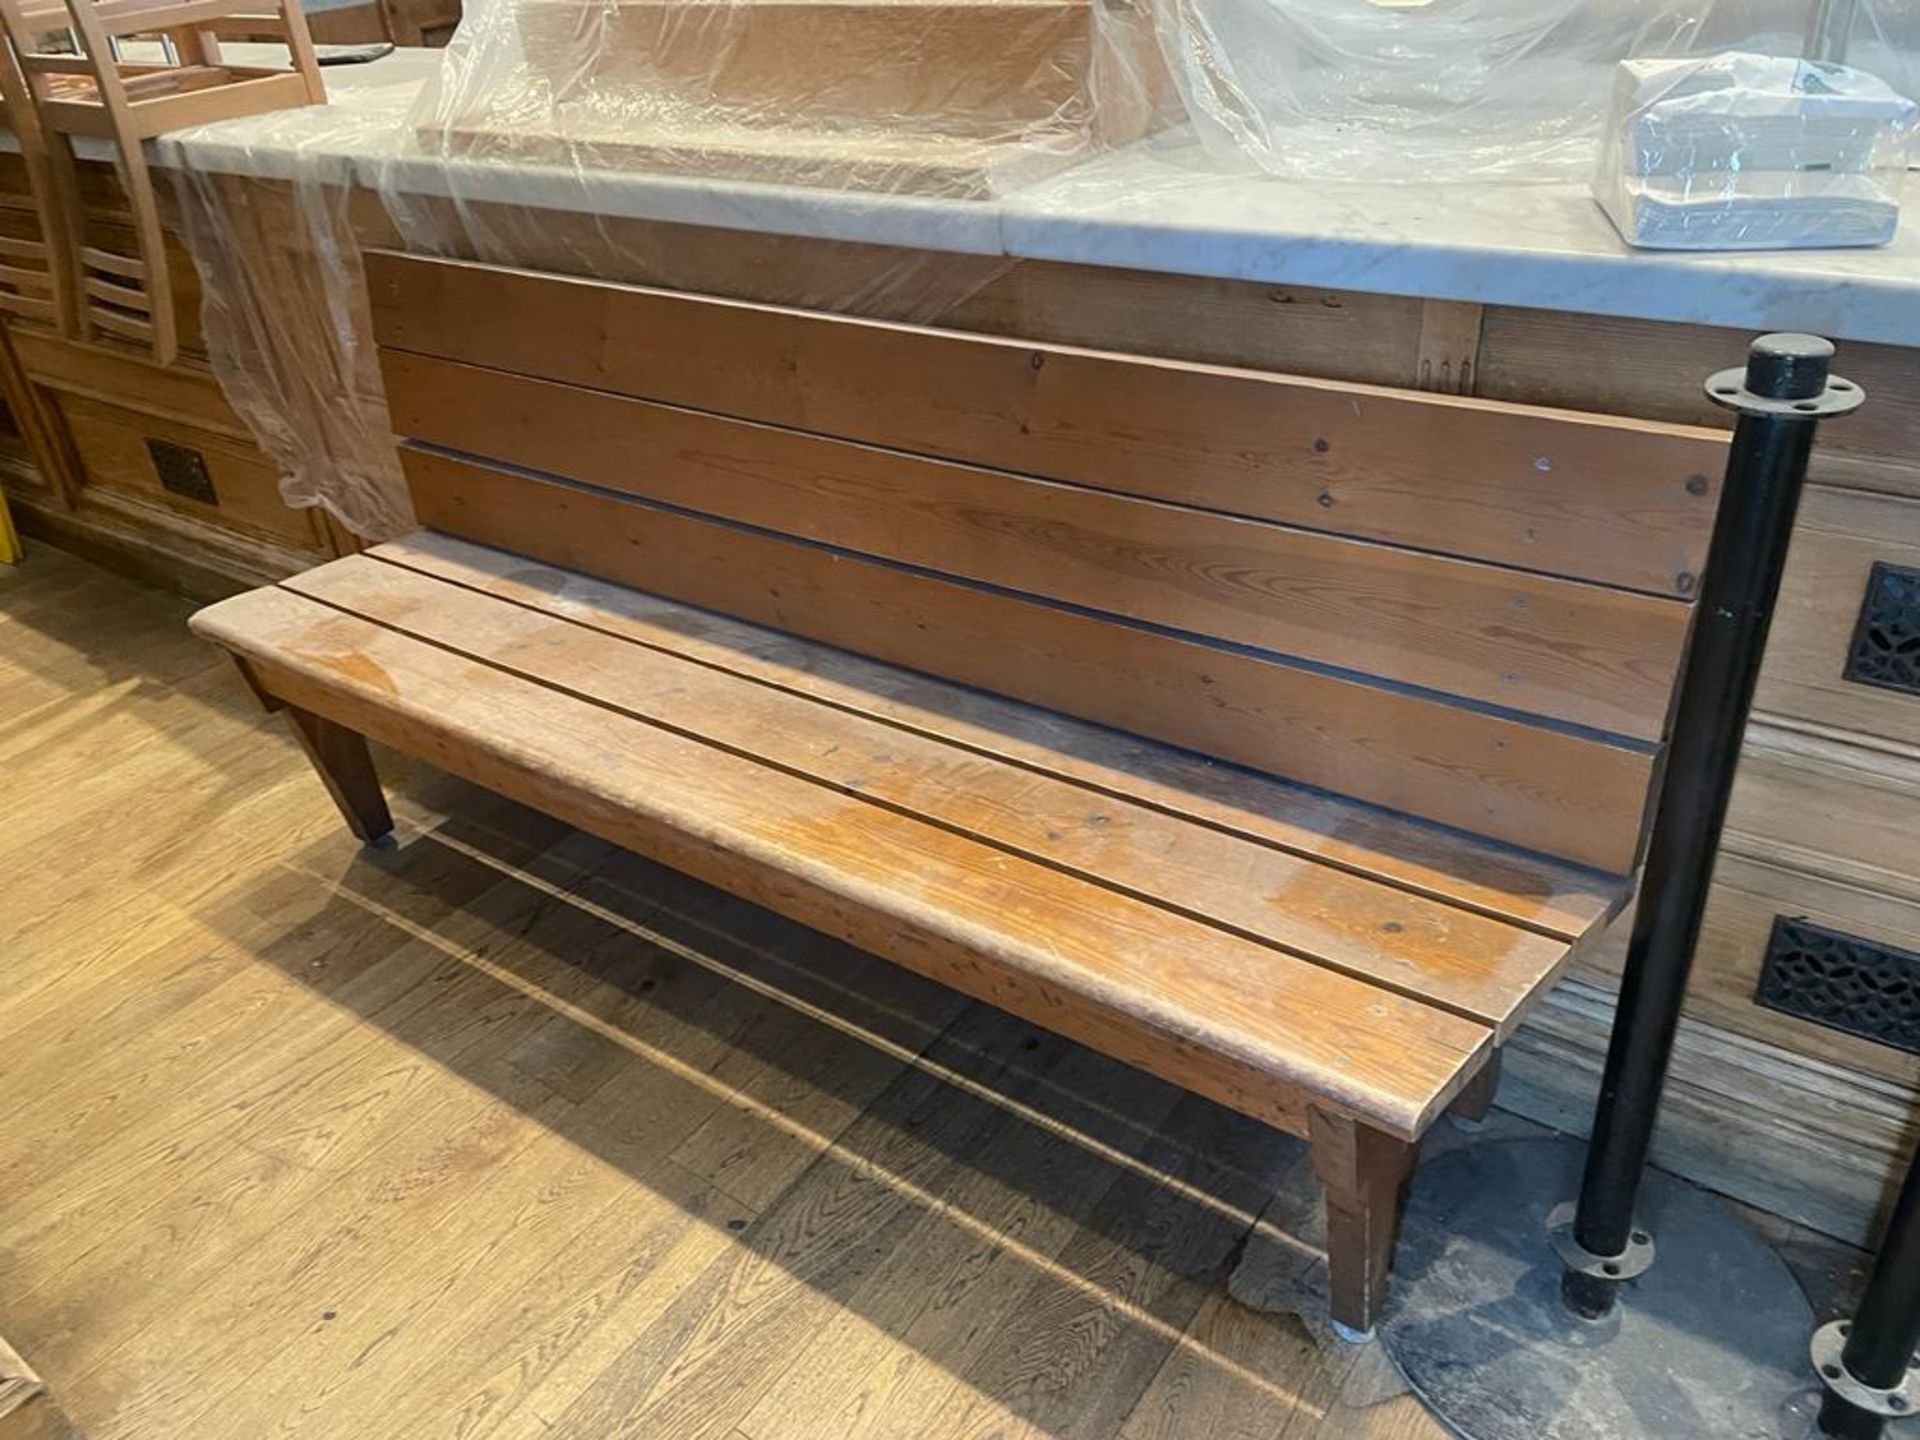 1 x Rustic Restaurant Seating Bench - Recently Removed From a Restaurant Environment - Image 2 of 6